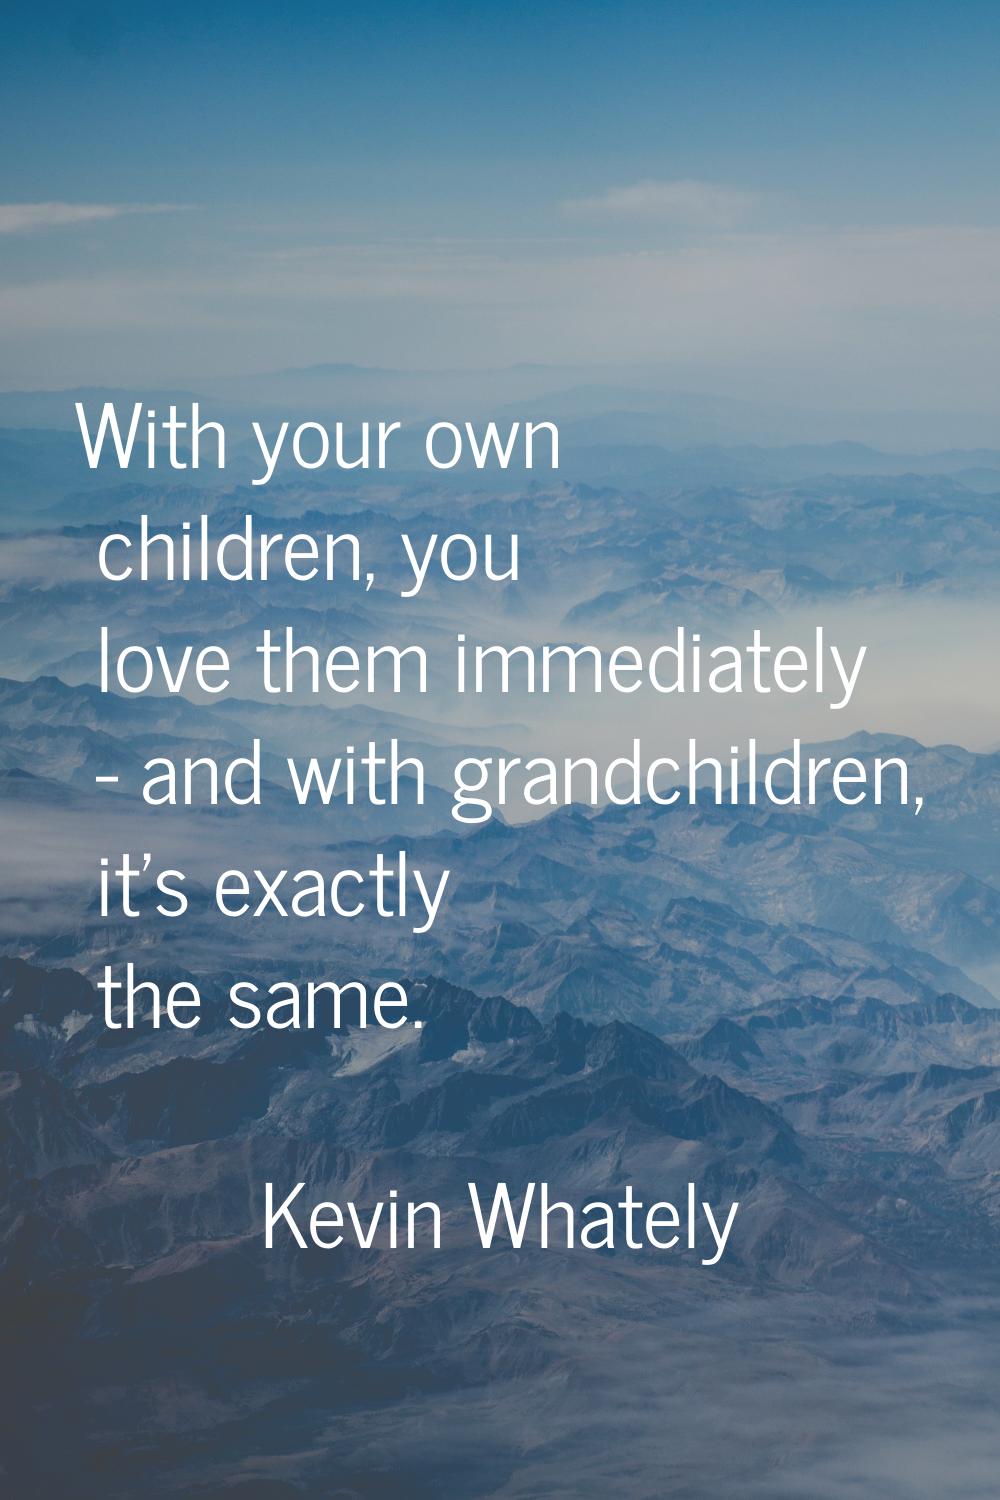 With your own children, you love them immediately - and with grandchildren, it's exactly the same.